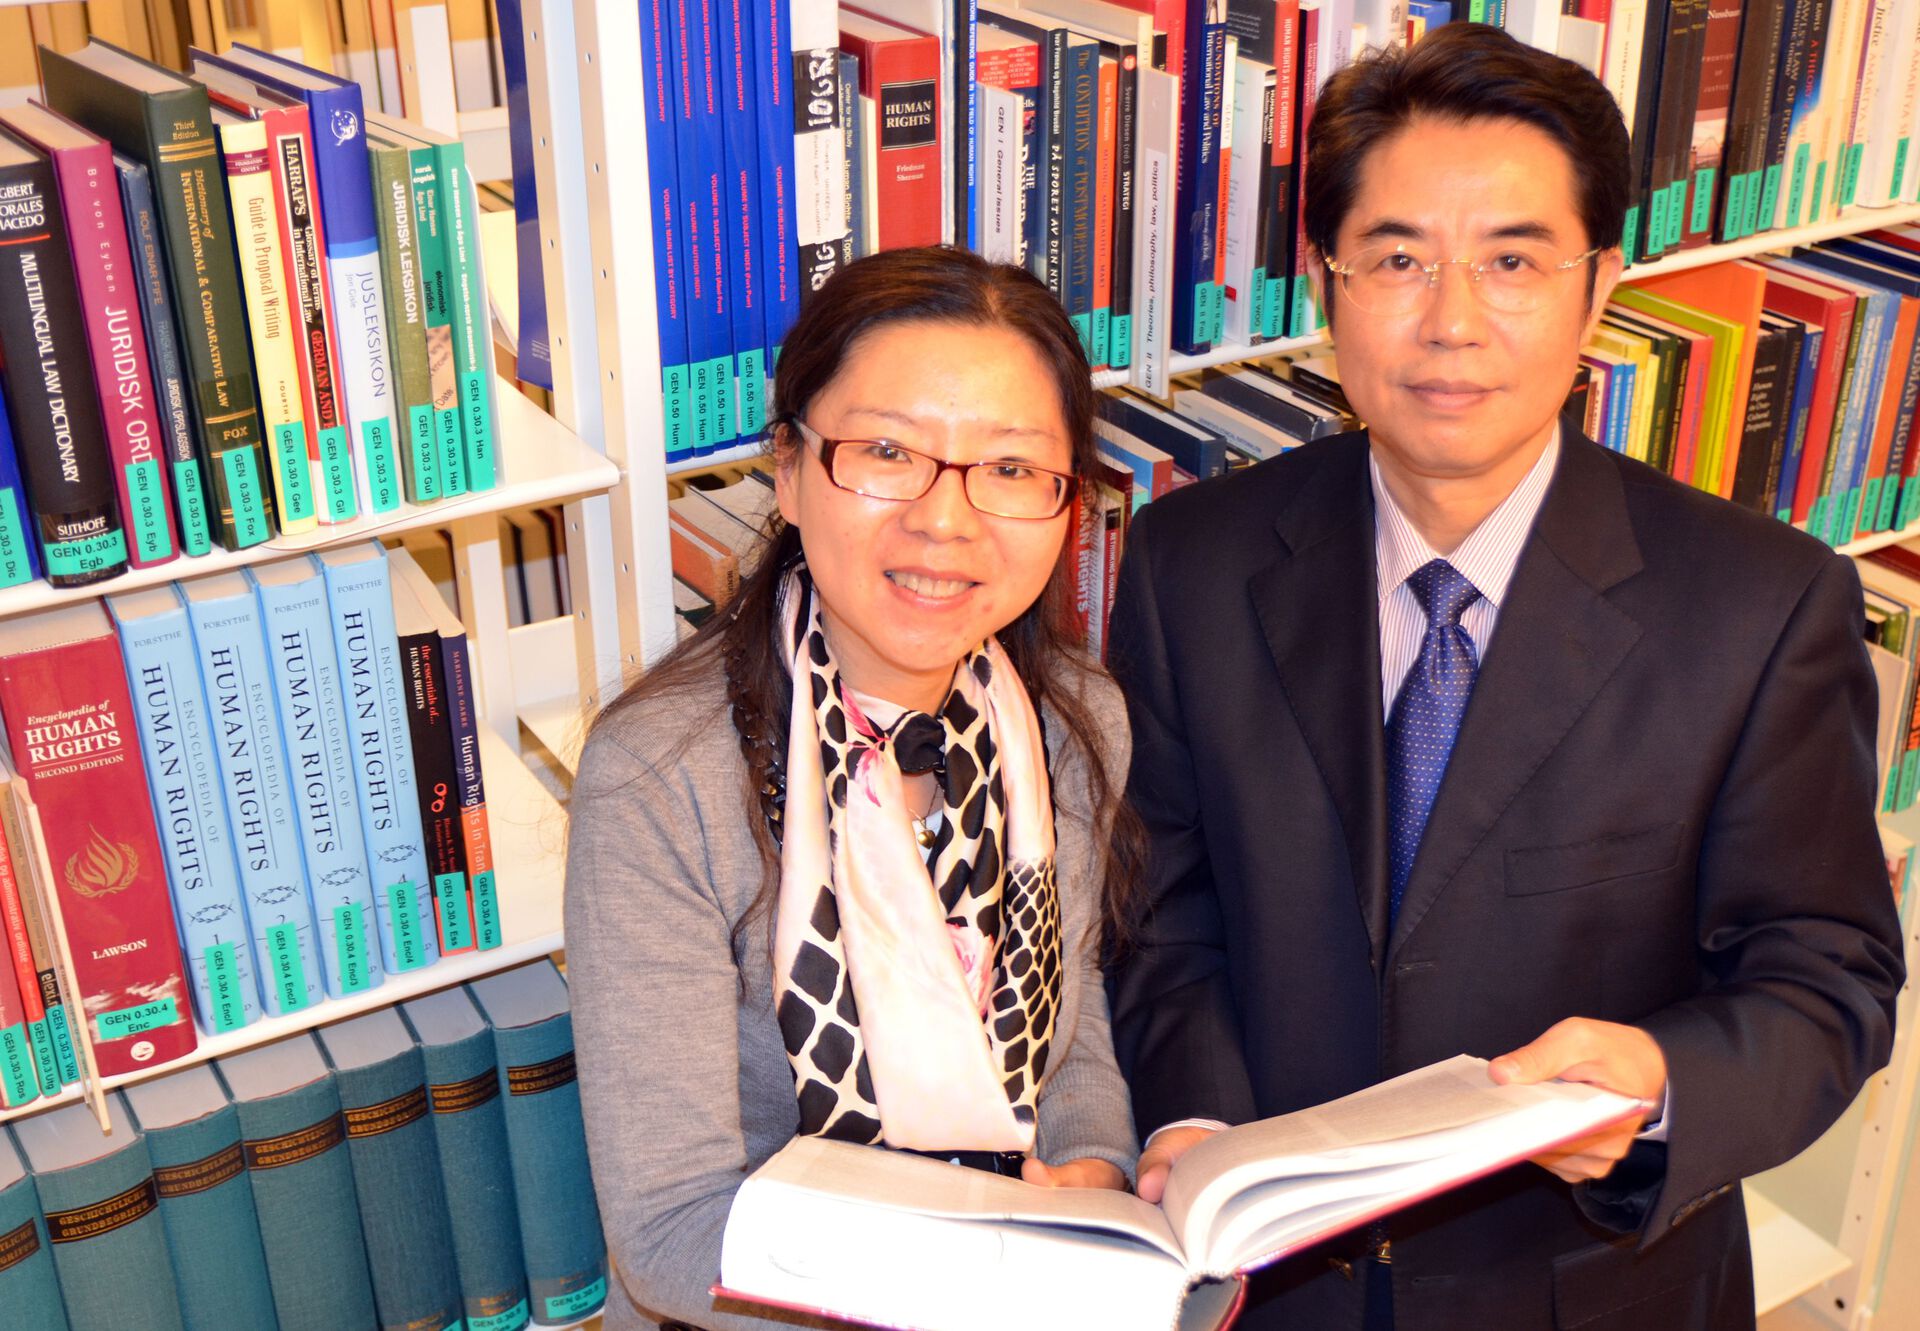 At the NCHR, more than 30 Chinese law experts have been hosted through long-term visiting scholar programmes. In 2013, Professor Yang Songcai from Guangzhou University and Dr. Sun Meng from the China University of Political Science and Law were visiting scholars at the NCHR.&amp;#160;